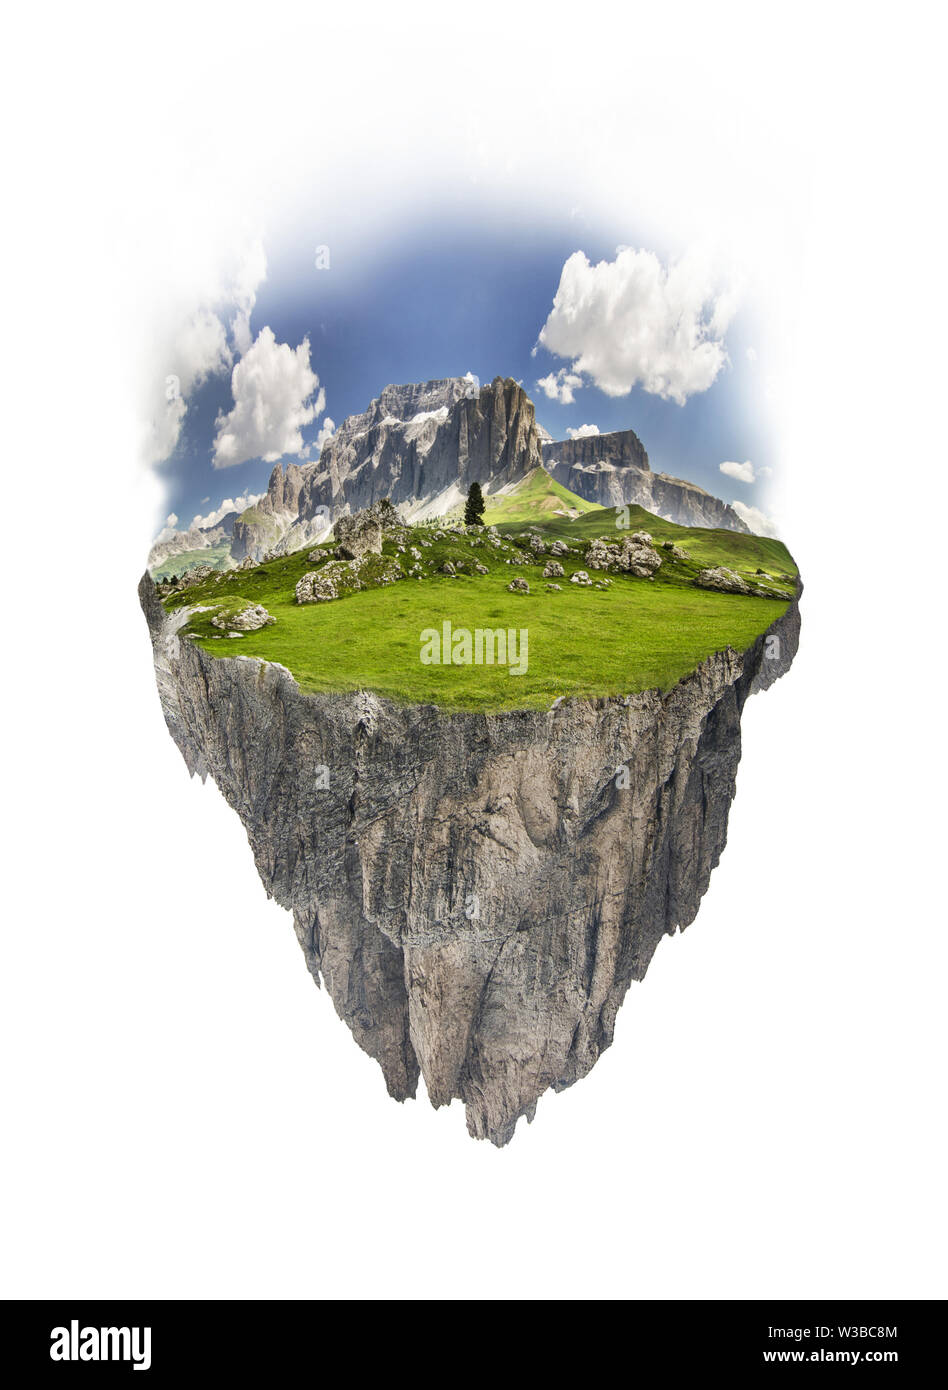 conceptual illustration for an ecological and clean green planet Stock Photo